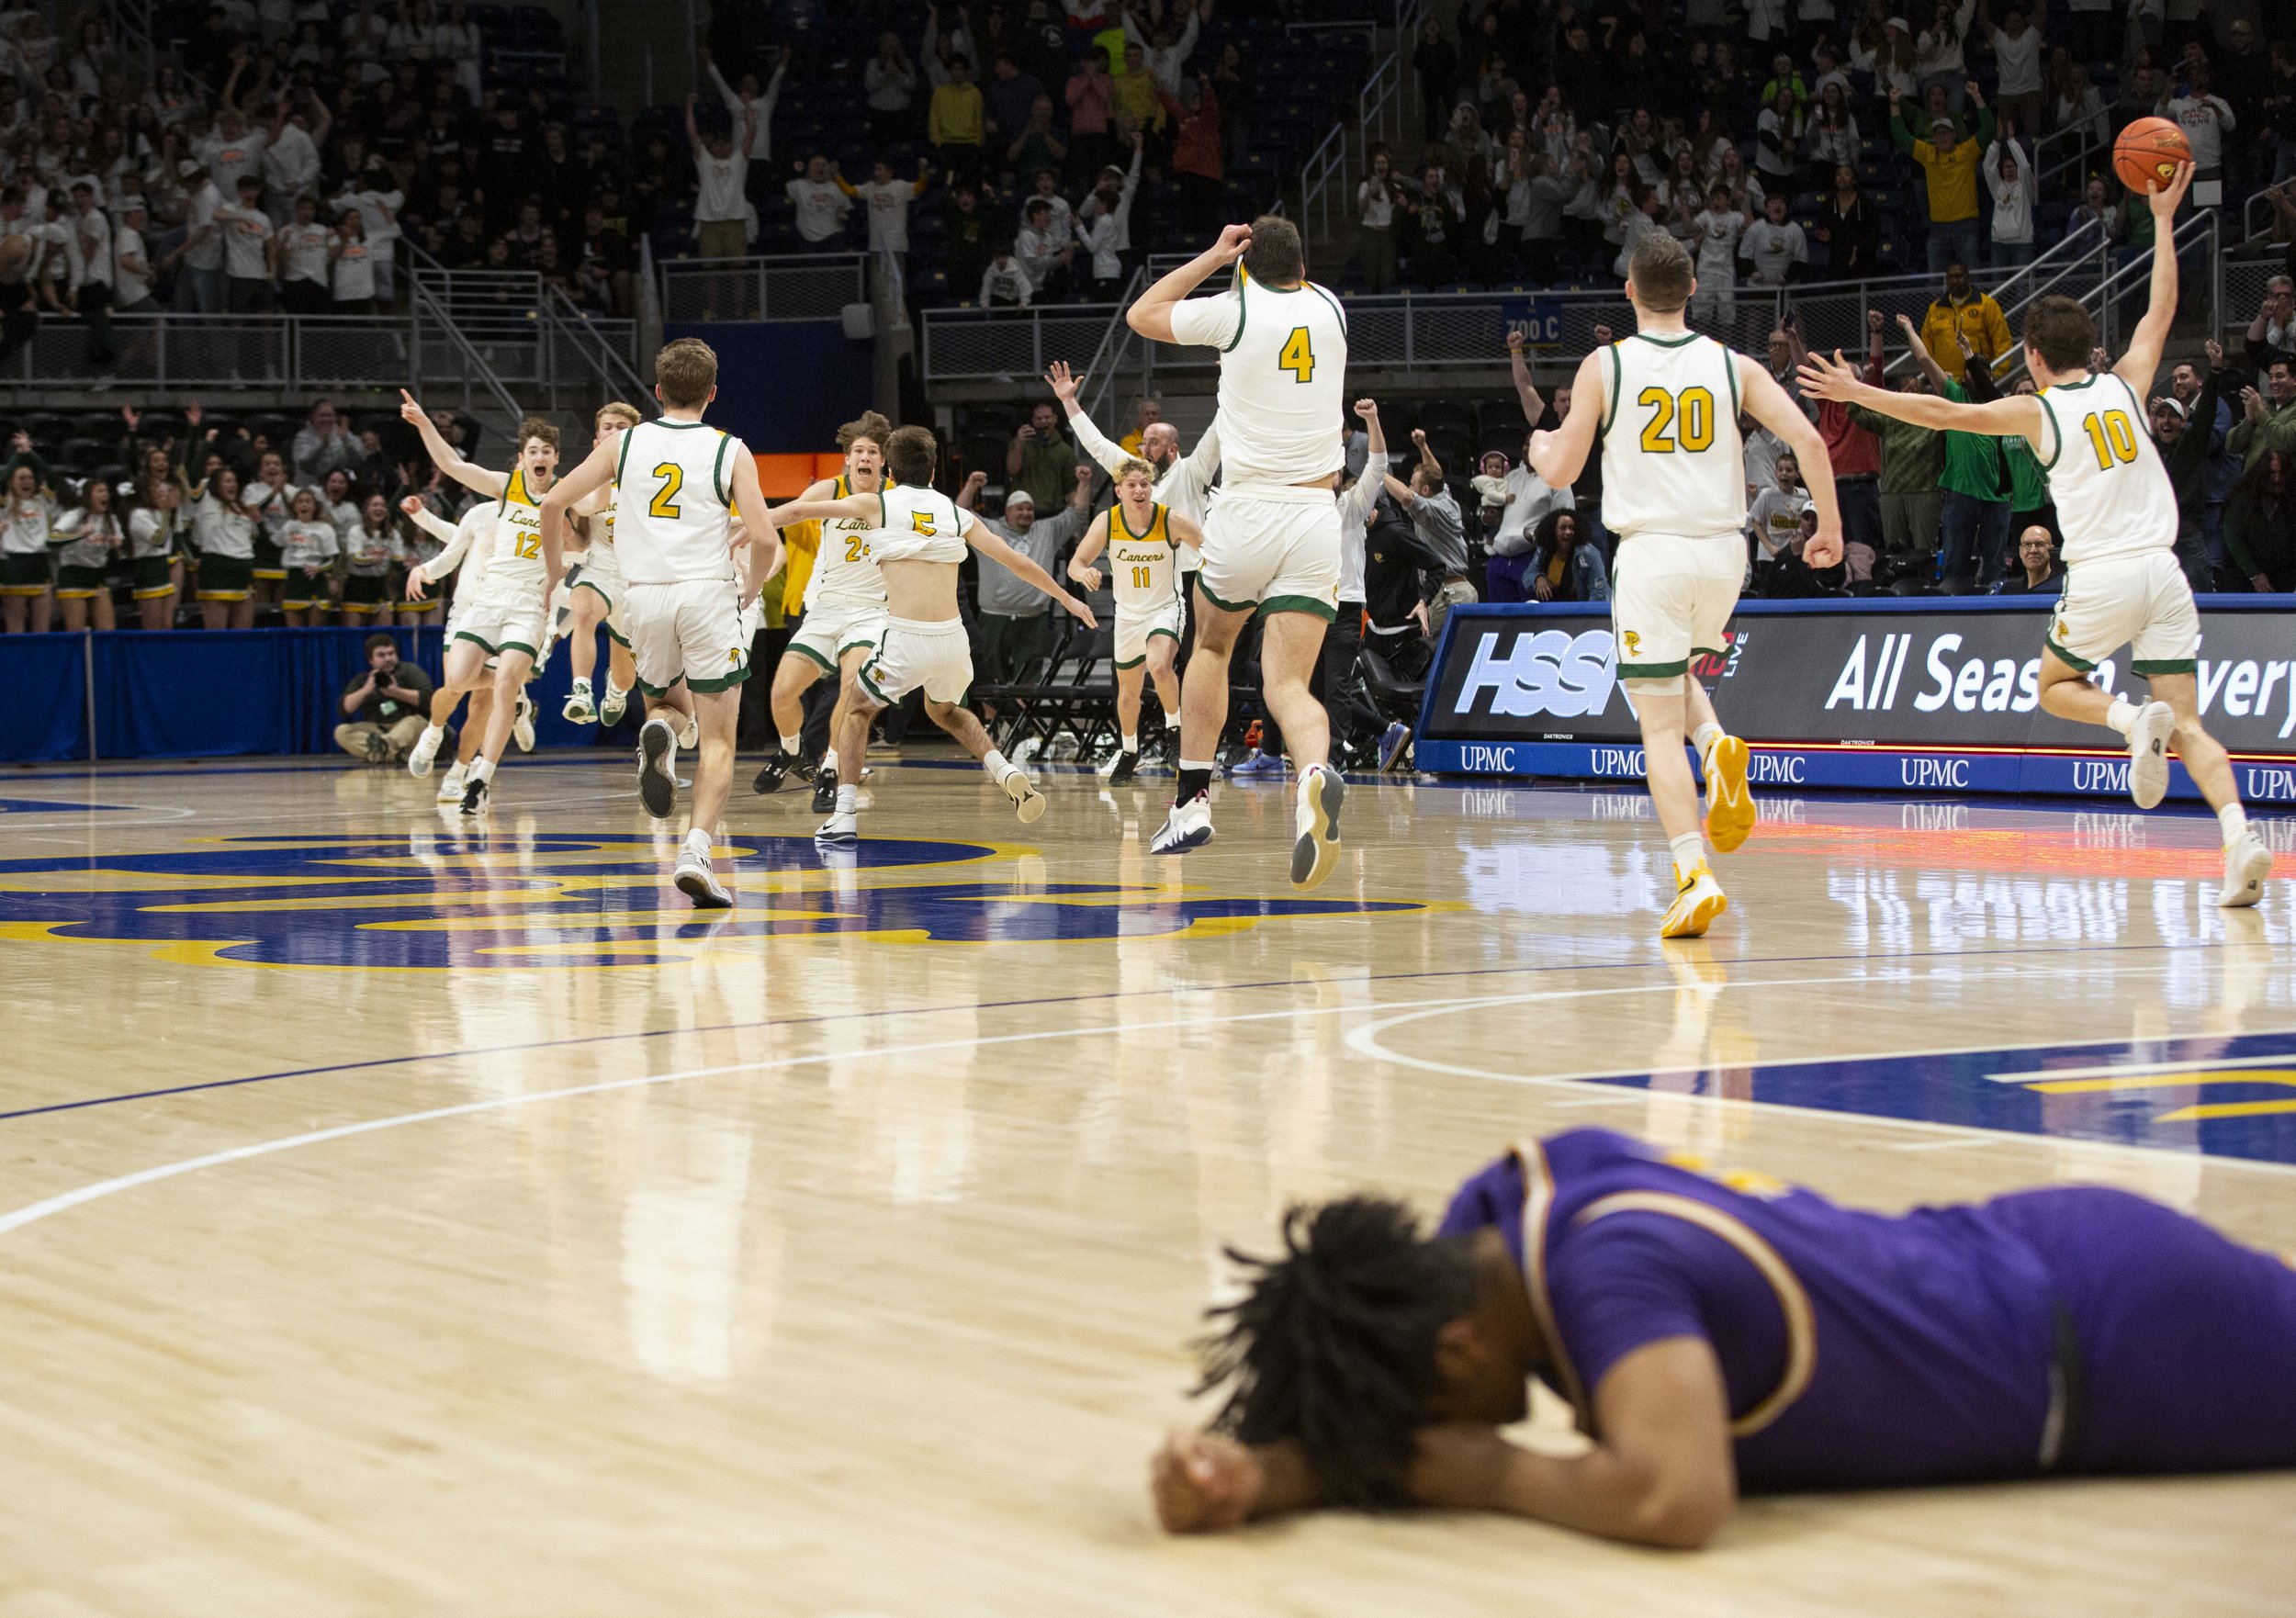  Deer Lakes celebrates their 61-60 victory against OLSH in the WPIAL Class 3A championship on Friday, March 3, 2023, at Petersen Events Center. OLSH's Dereon Greer can be seen laying on the court after the down-to-the-buzzer defeat. (Emily Matthews/P